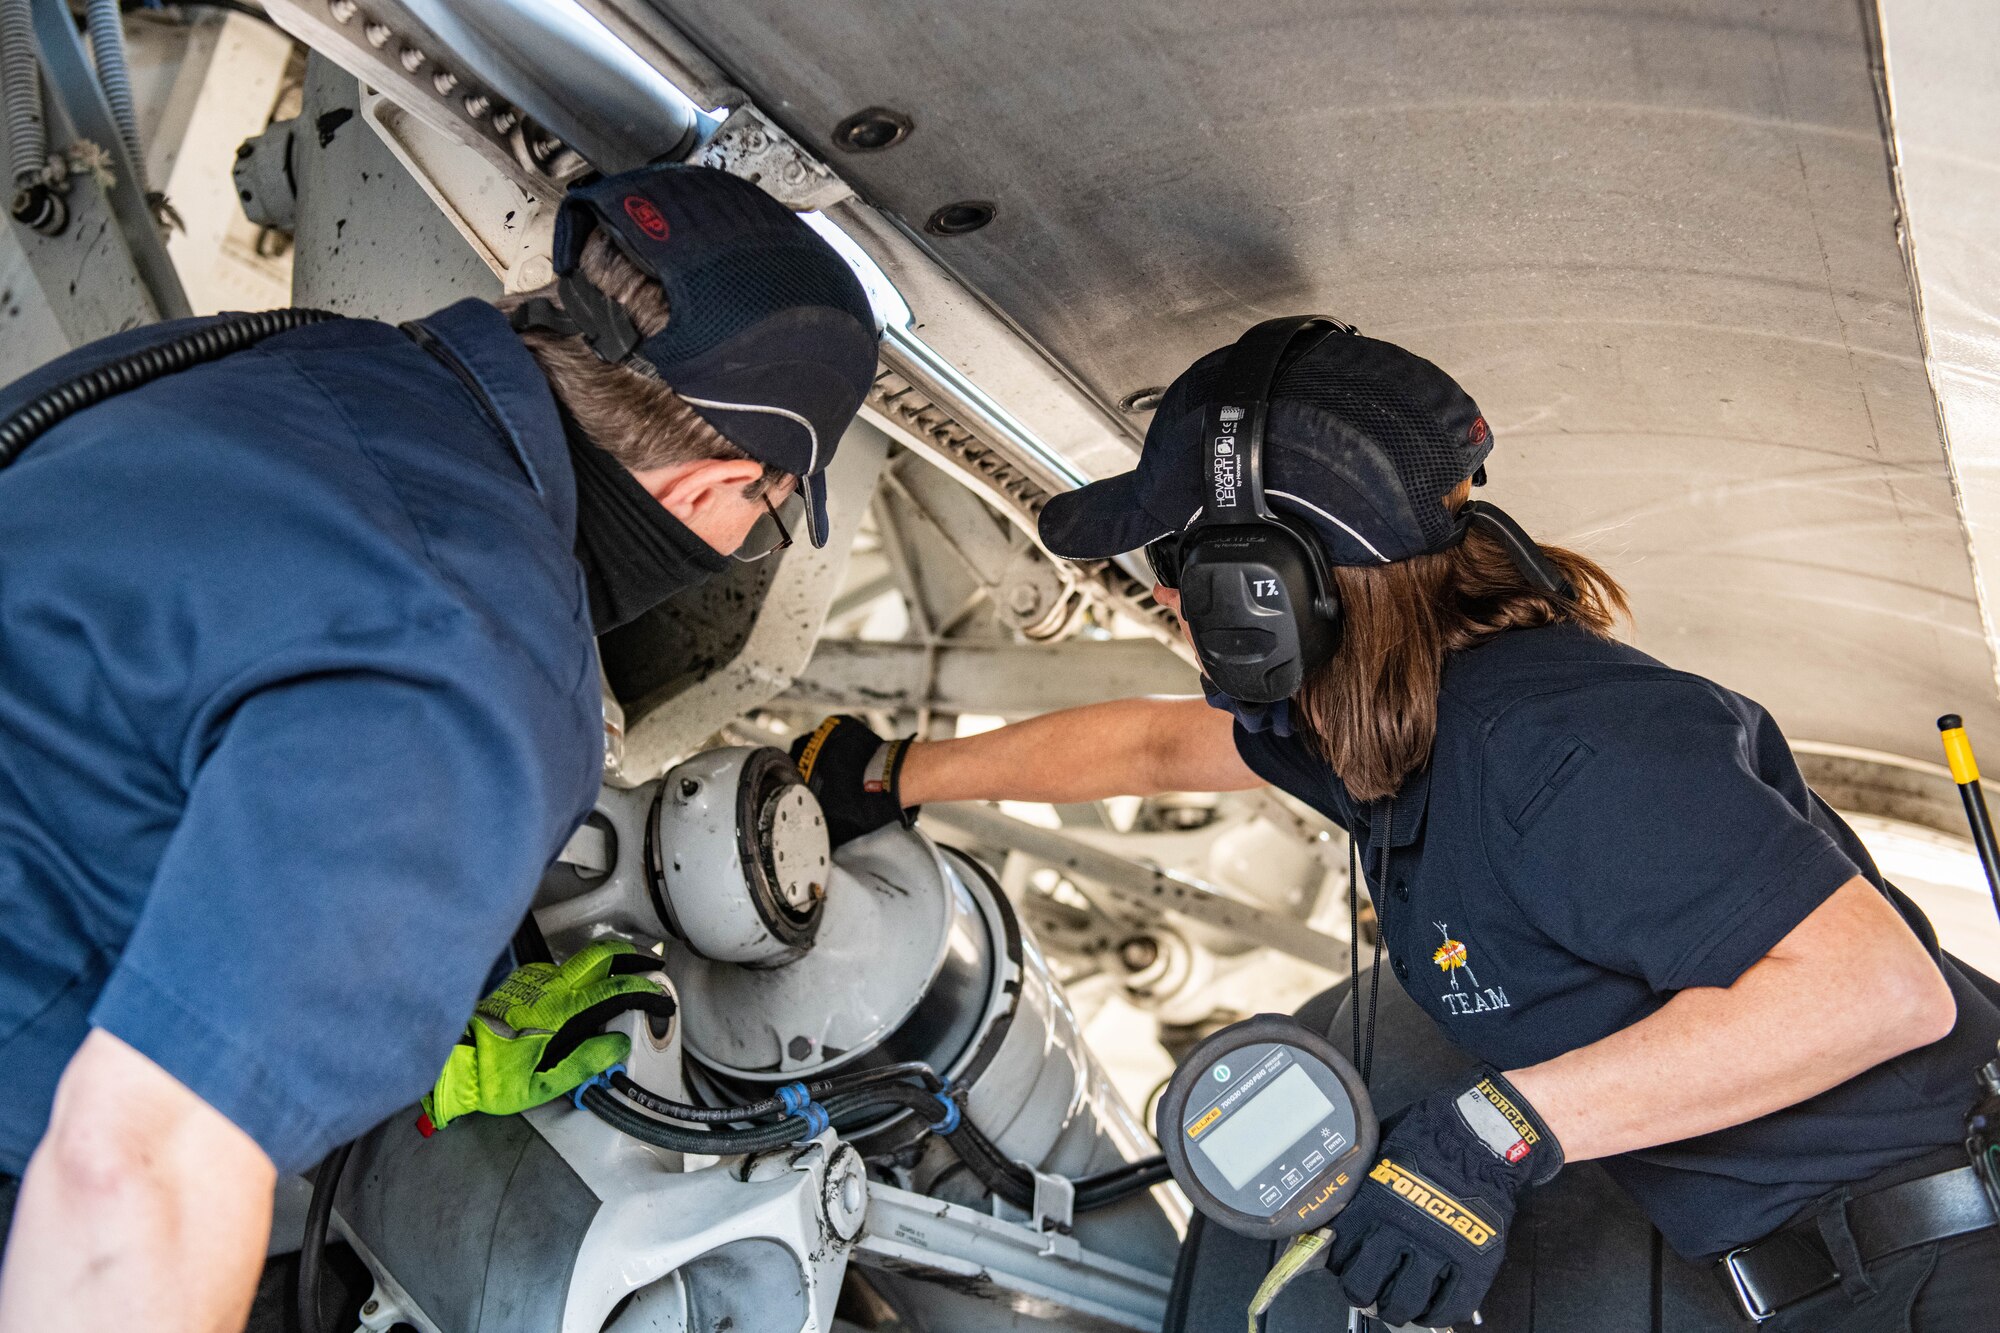 From left, Tara Pope, 97th Aircraft Maintenance Squadron C-17 Globemaster III crew chief, and Jennifer Cortez, 97th MXG C-17 aircraft attendant, conduct a check on the landing gear struts of a C-17, March 10, 2021, at Altus Air Force Base, Oklahoma. On a yearly basis, maintainers from all three airframes help support more than 5,000 sorties and 23,000 flying hours for the next generation of mobility Airmen. (U.S. Air Force photo by Senior Airman Breanna Klemm)